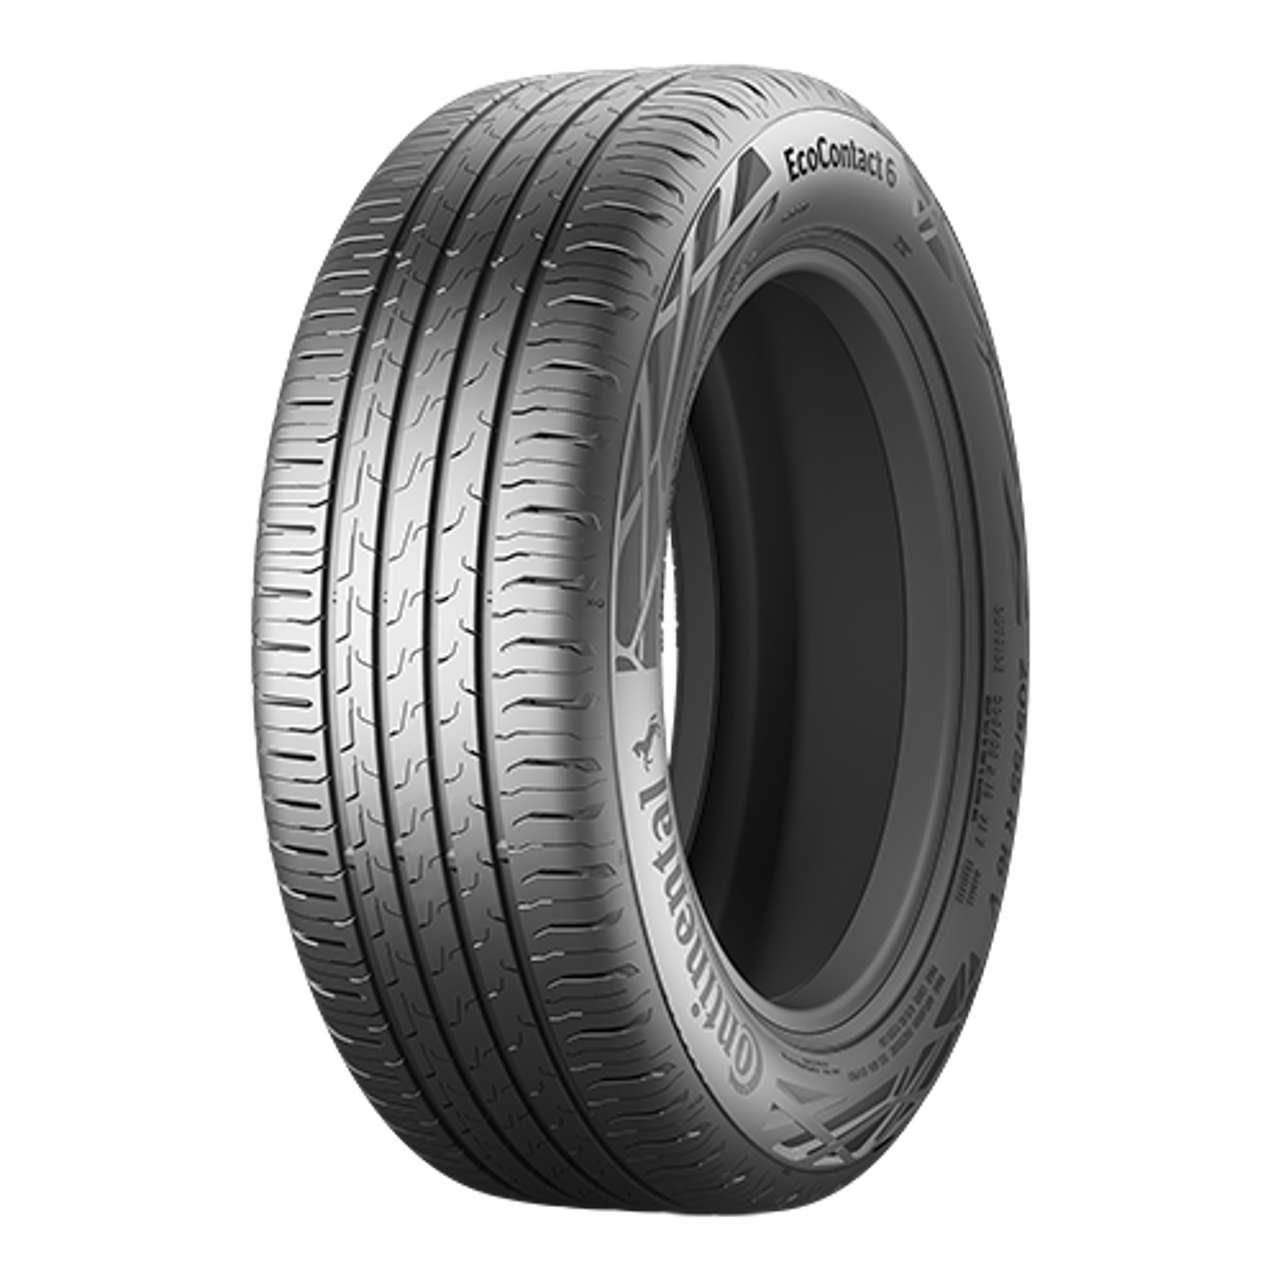 CONTINENTAL ECOCONTACT 6 (EVc) 215/55R17 94V von Continental